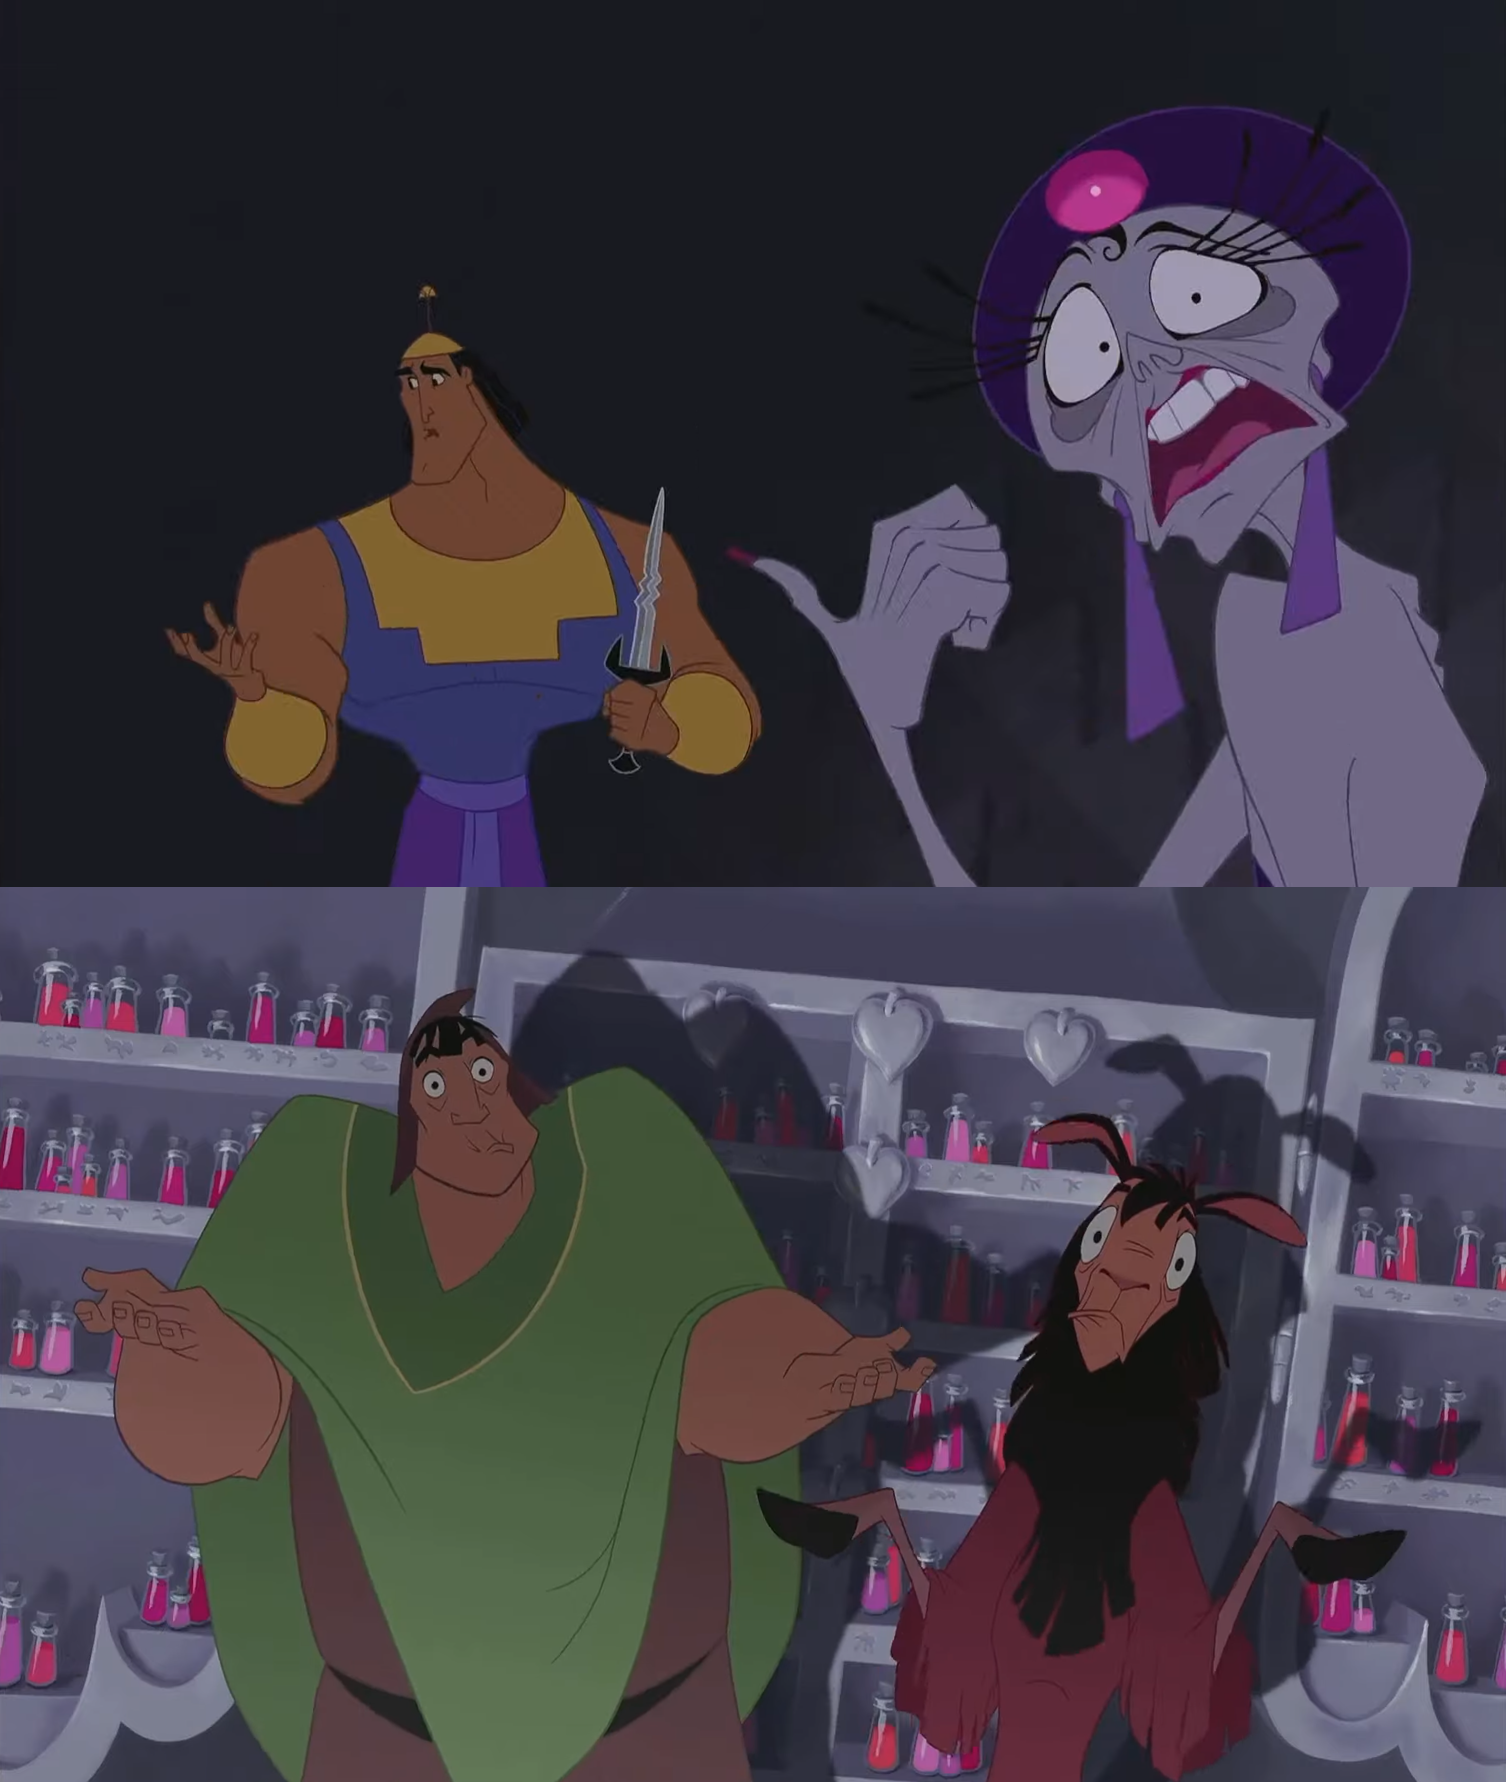 High Quality emperor's new groove kronk with angels in the lab Blank Meme Template